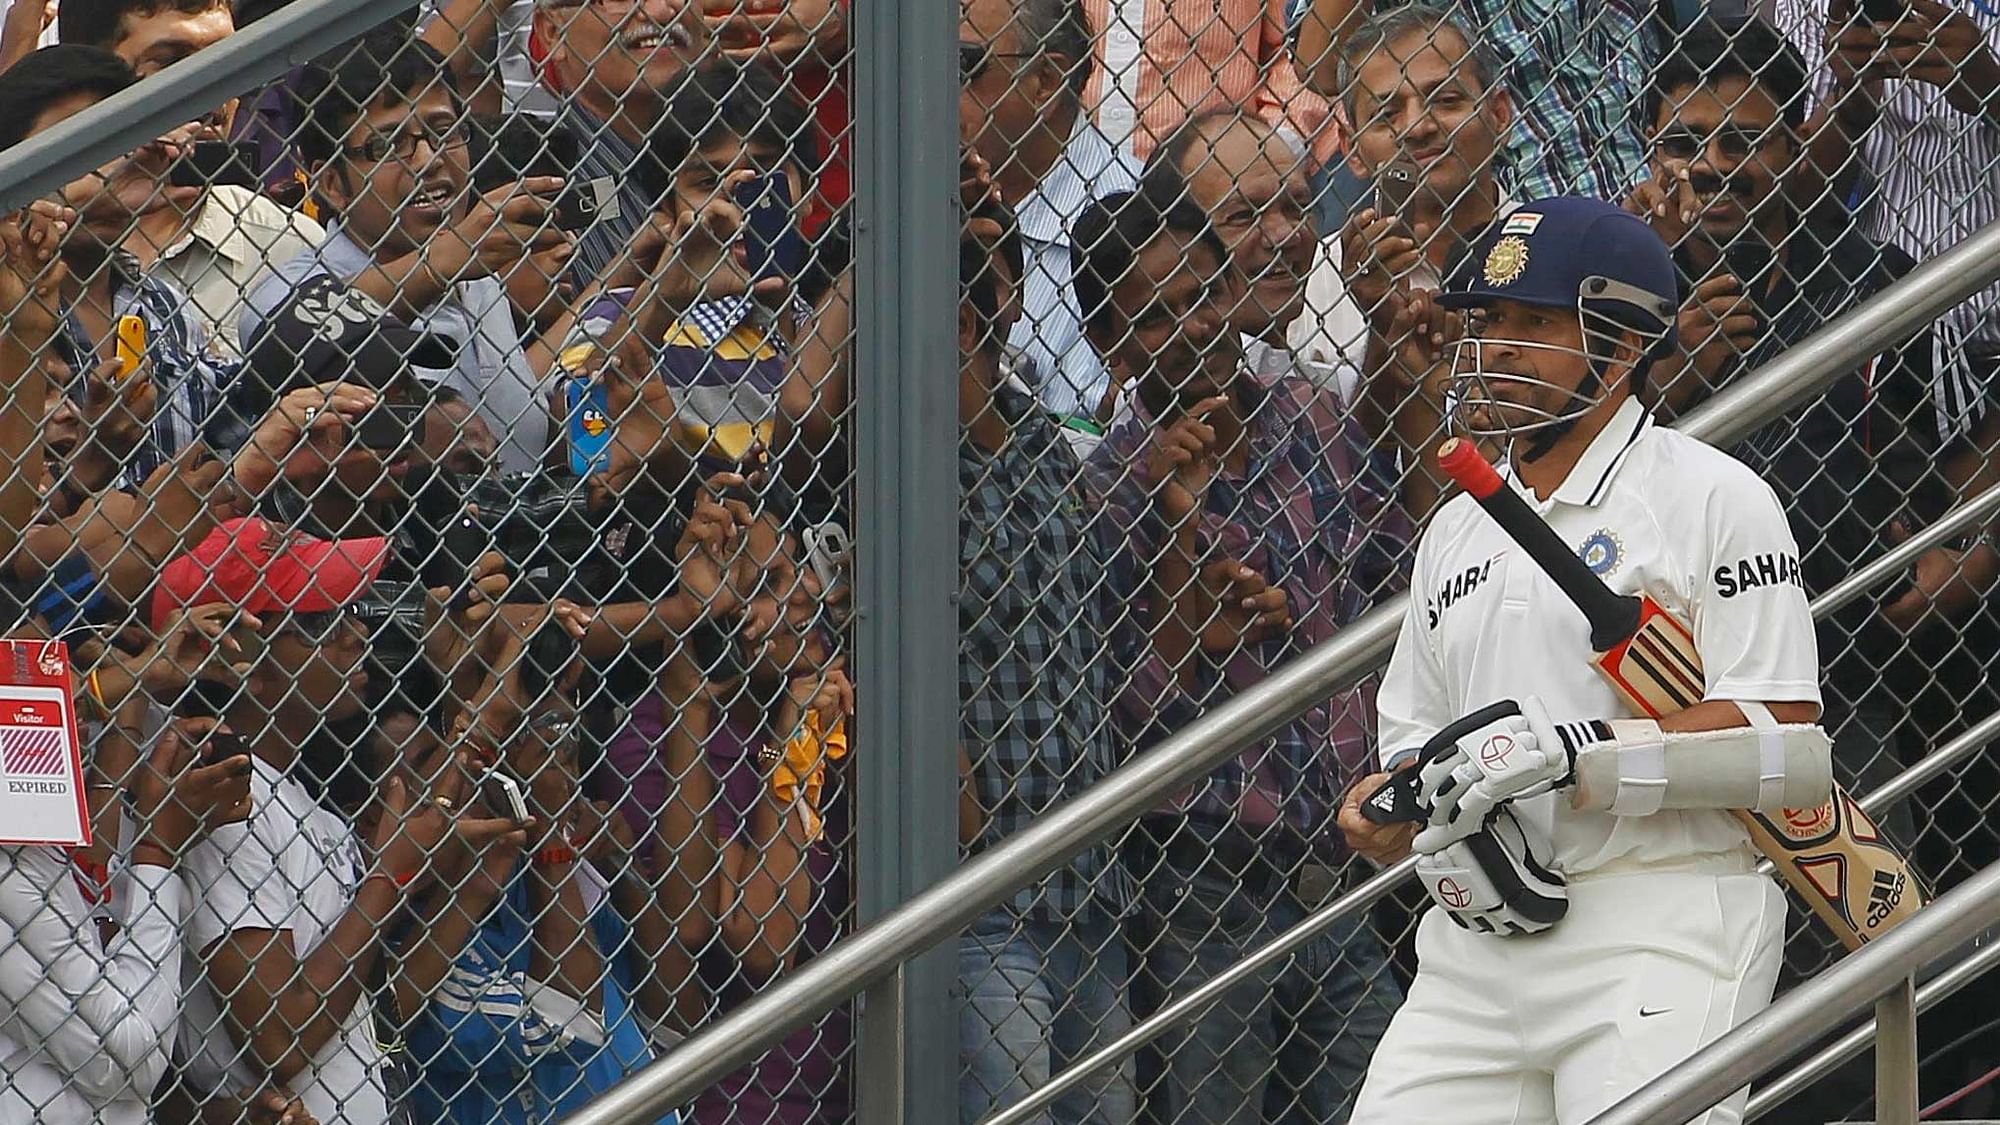 India’s Sachin Tendulkar arrives to bat as fans try to take pictures during the third day of their third test cricket match against West Indies in Mumbai November 24, 2011.&nbsp;